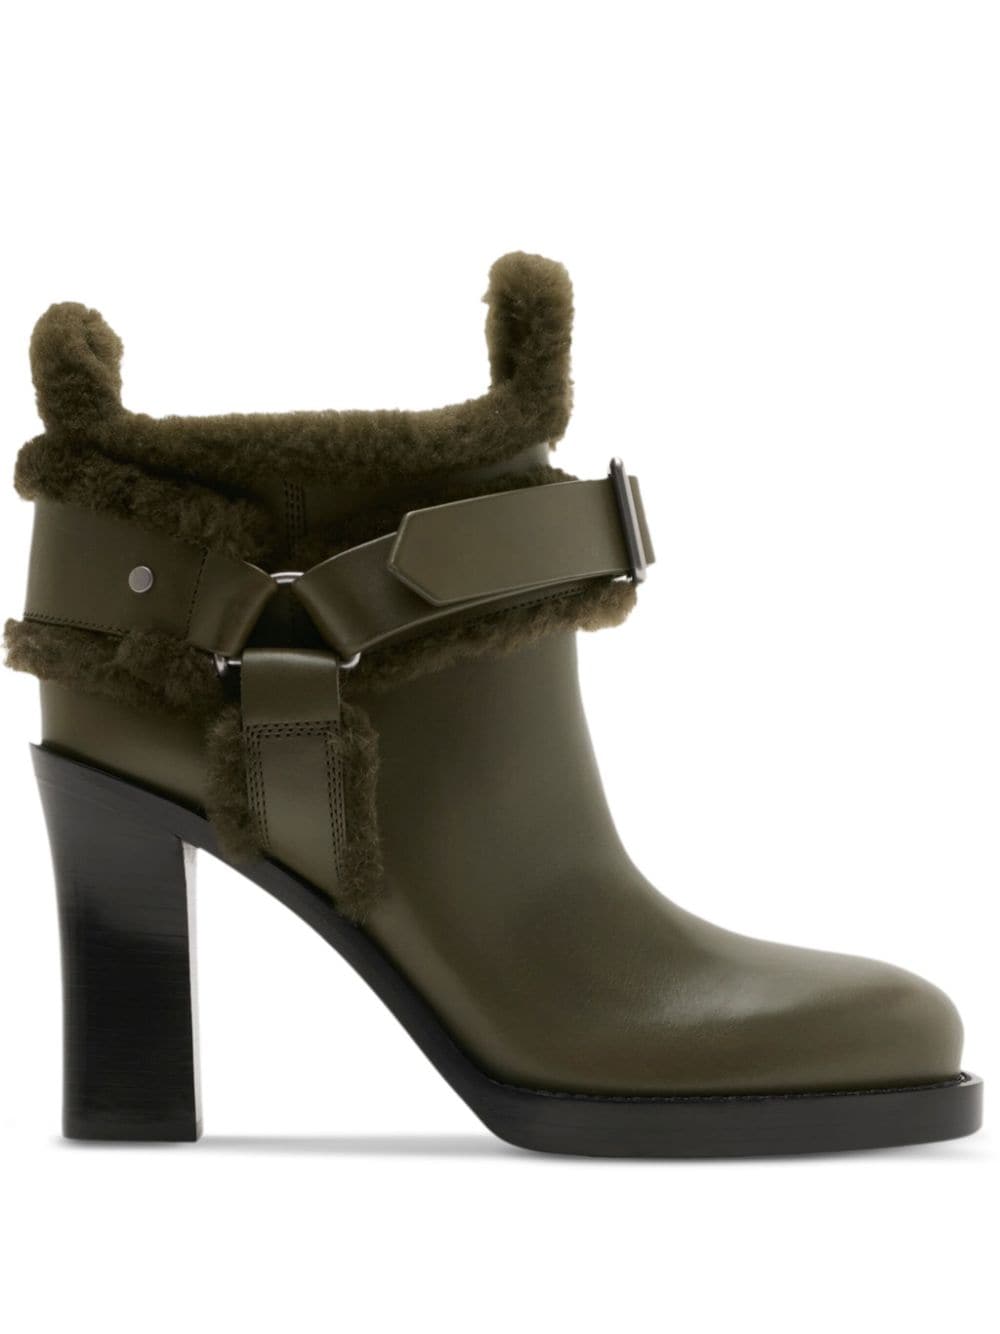 Burberry buckled 100mm leather ankle boots - Green von Burberry